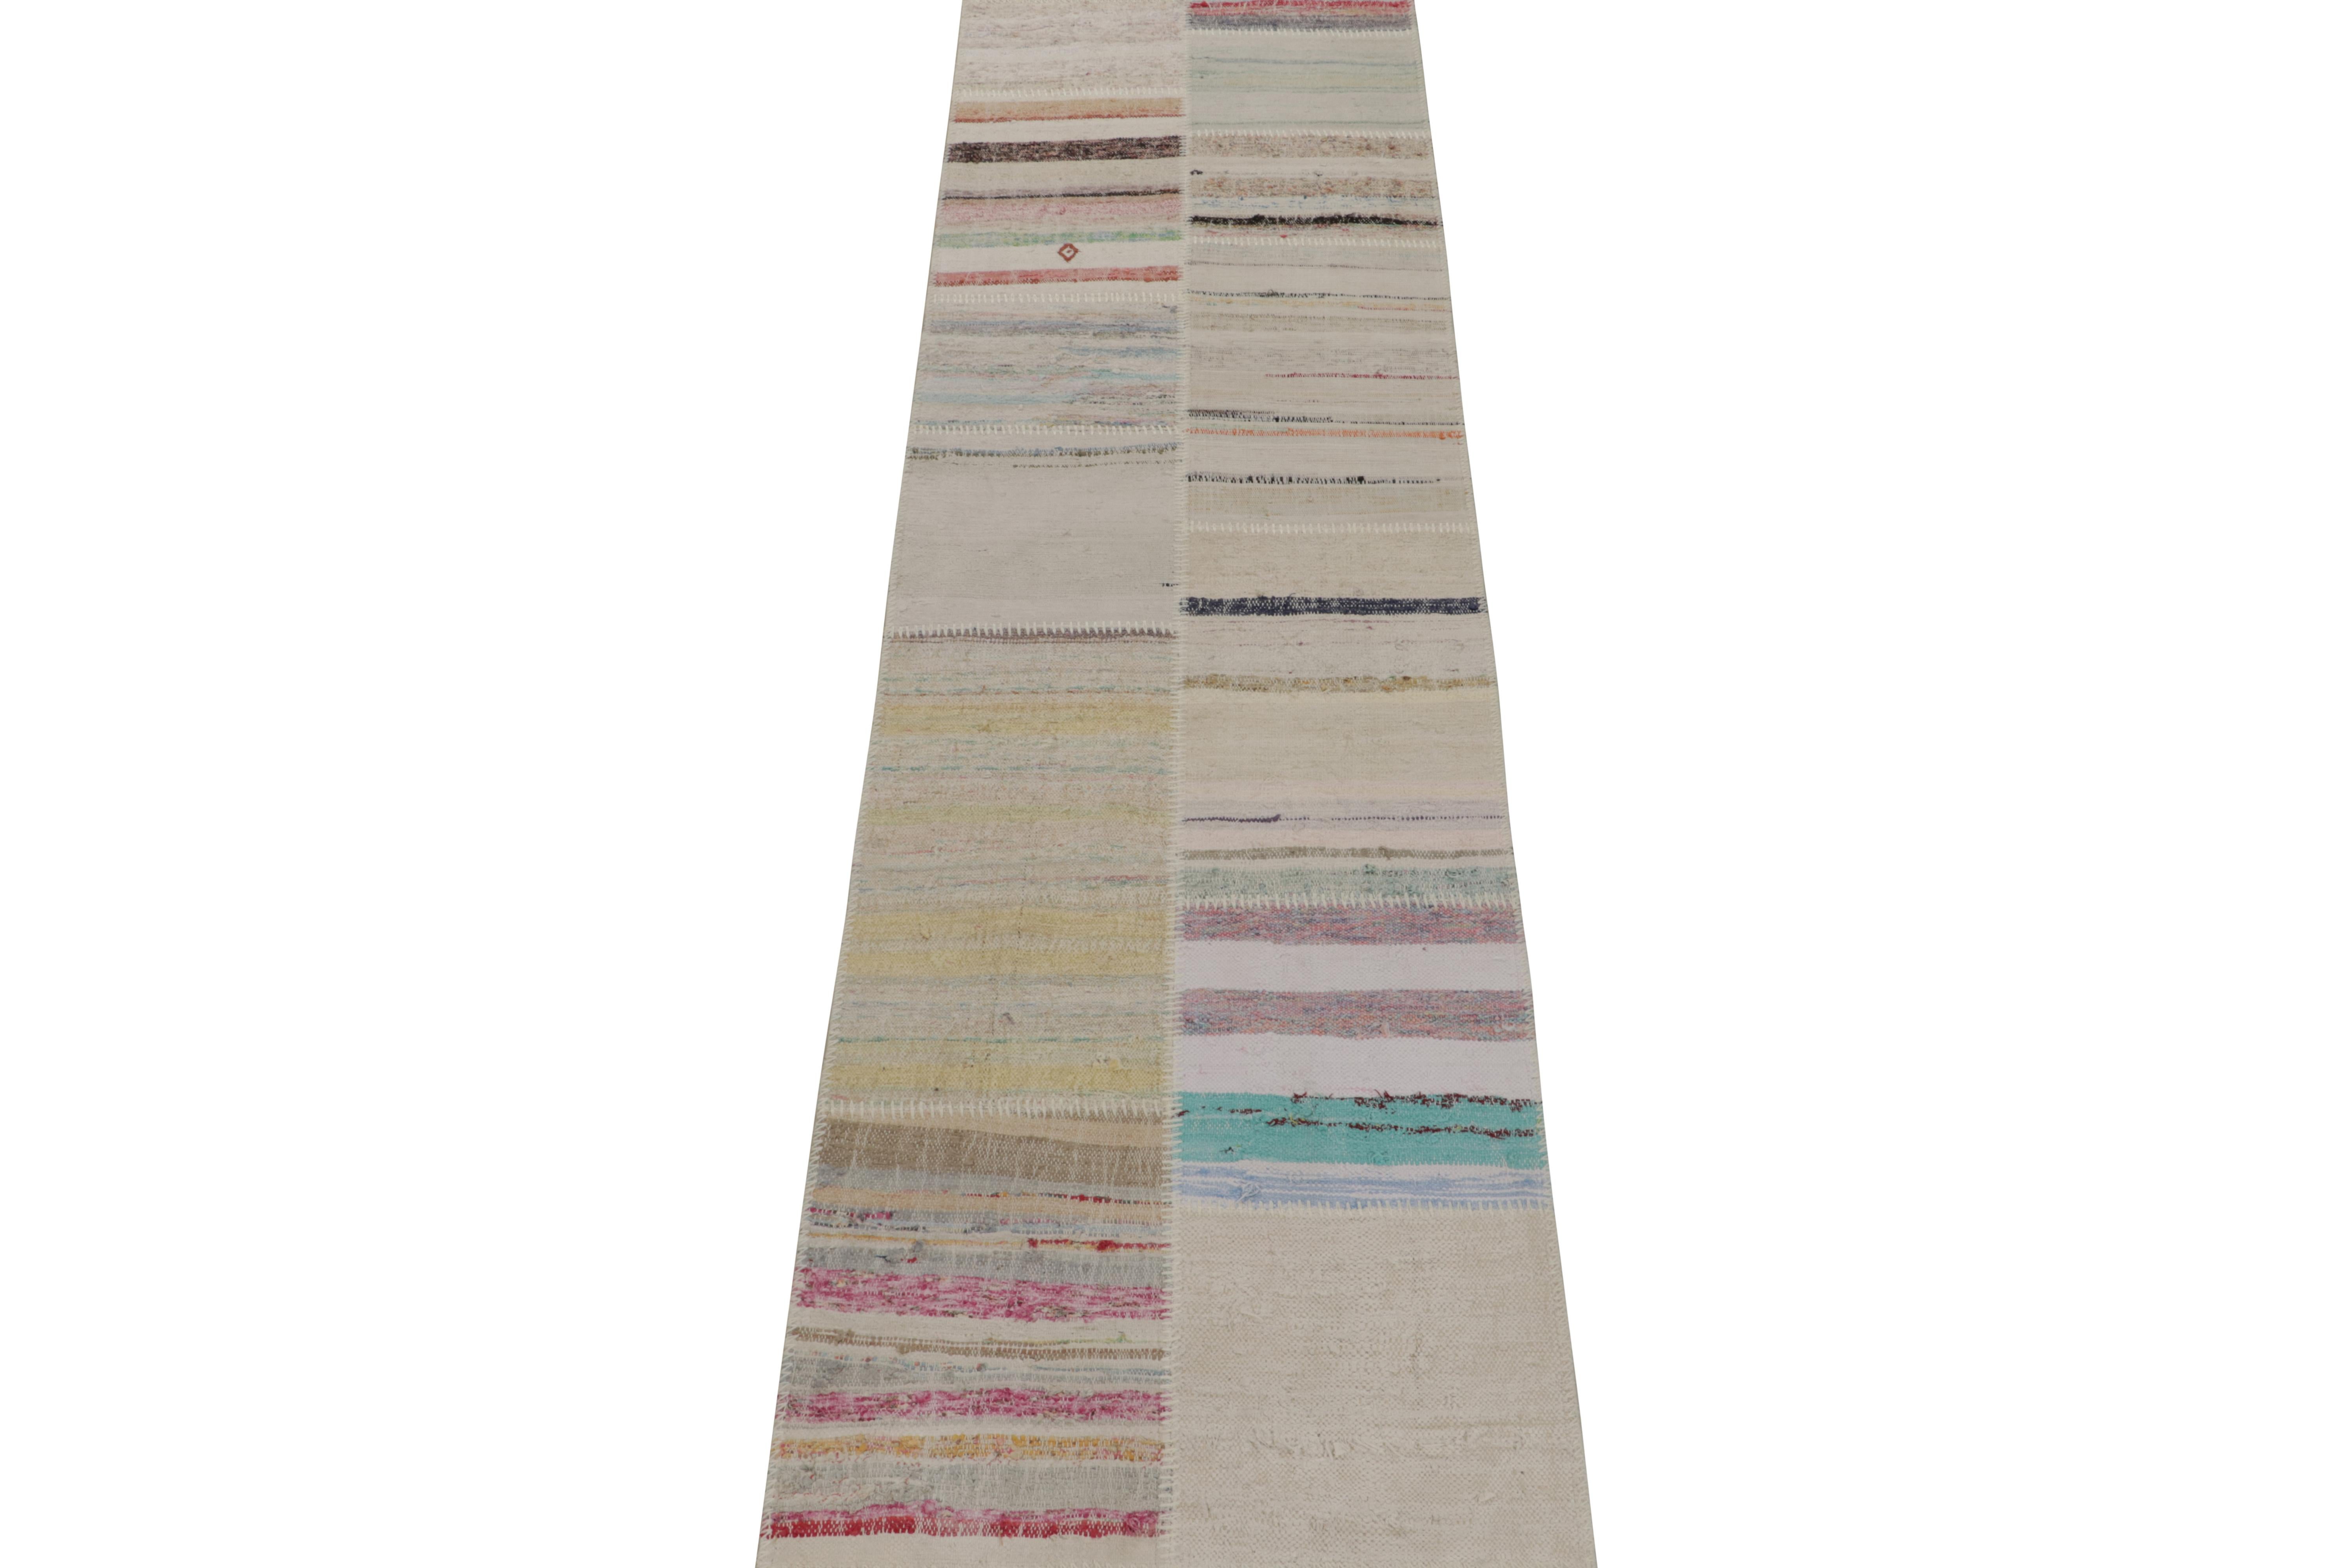 Handwoven in wool, Rug & Kilim presents a 3x10 runner from their innovative new patchwork kilim collection. 

On the Design: 

This flat weave technique repurposes vintage yarns in polychromatic stripes and striae, achieving a playful look with